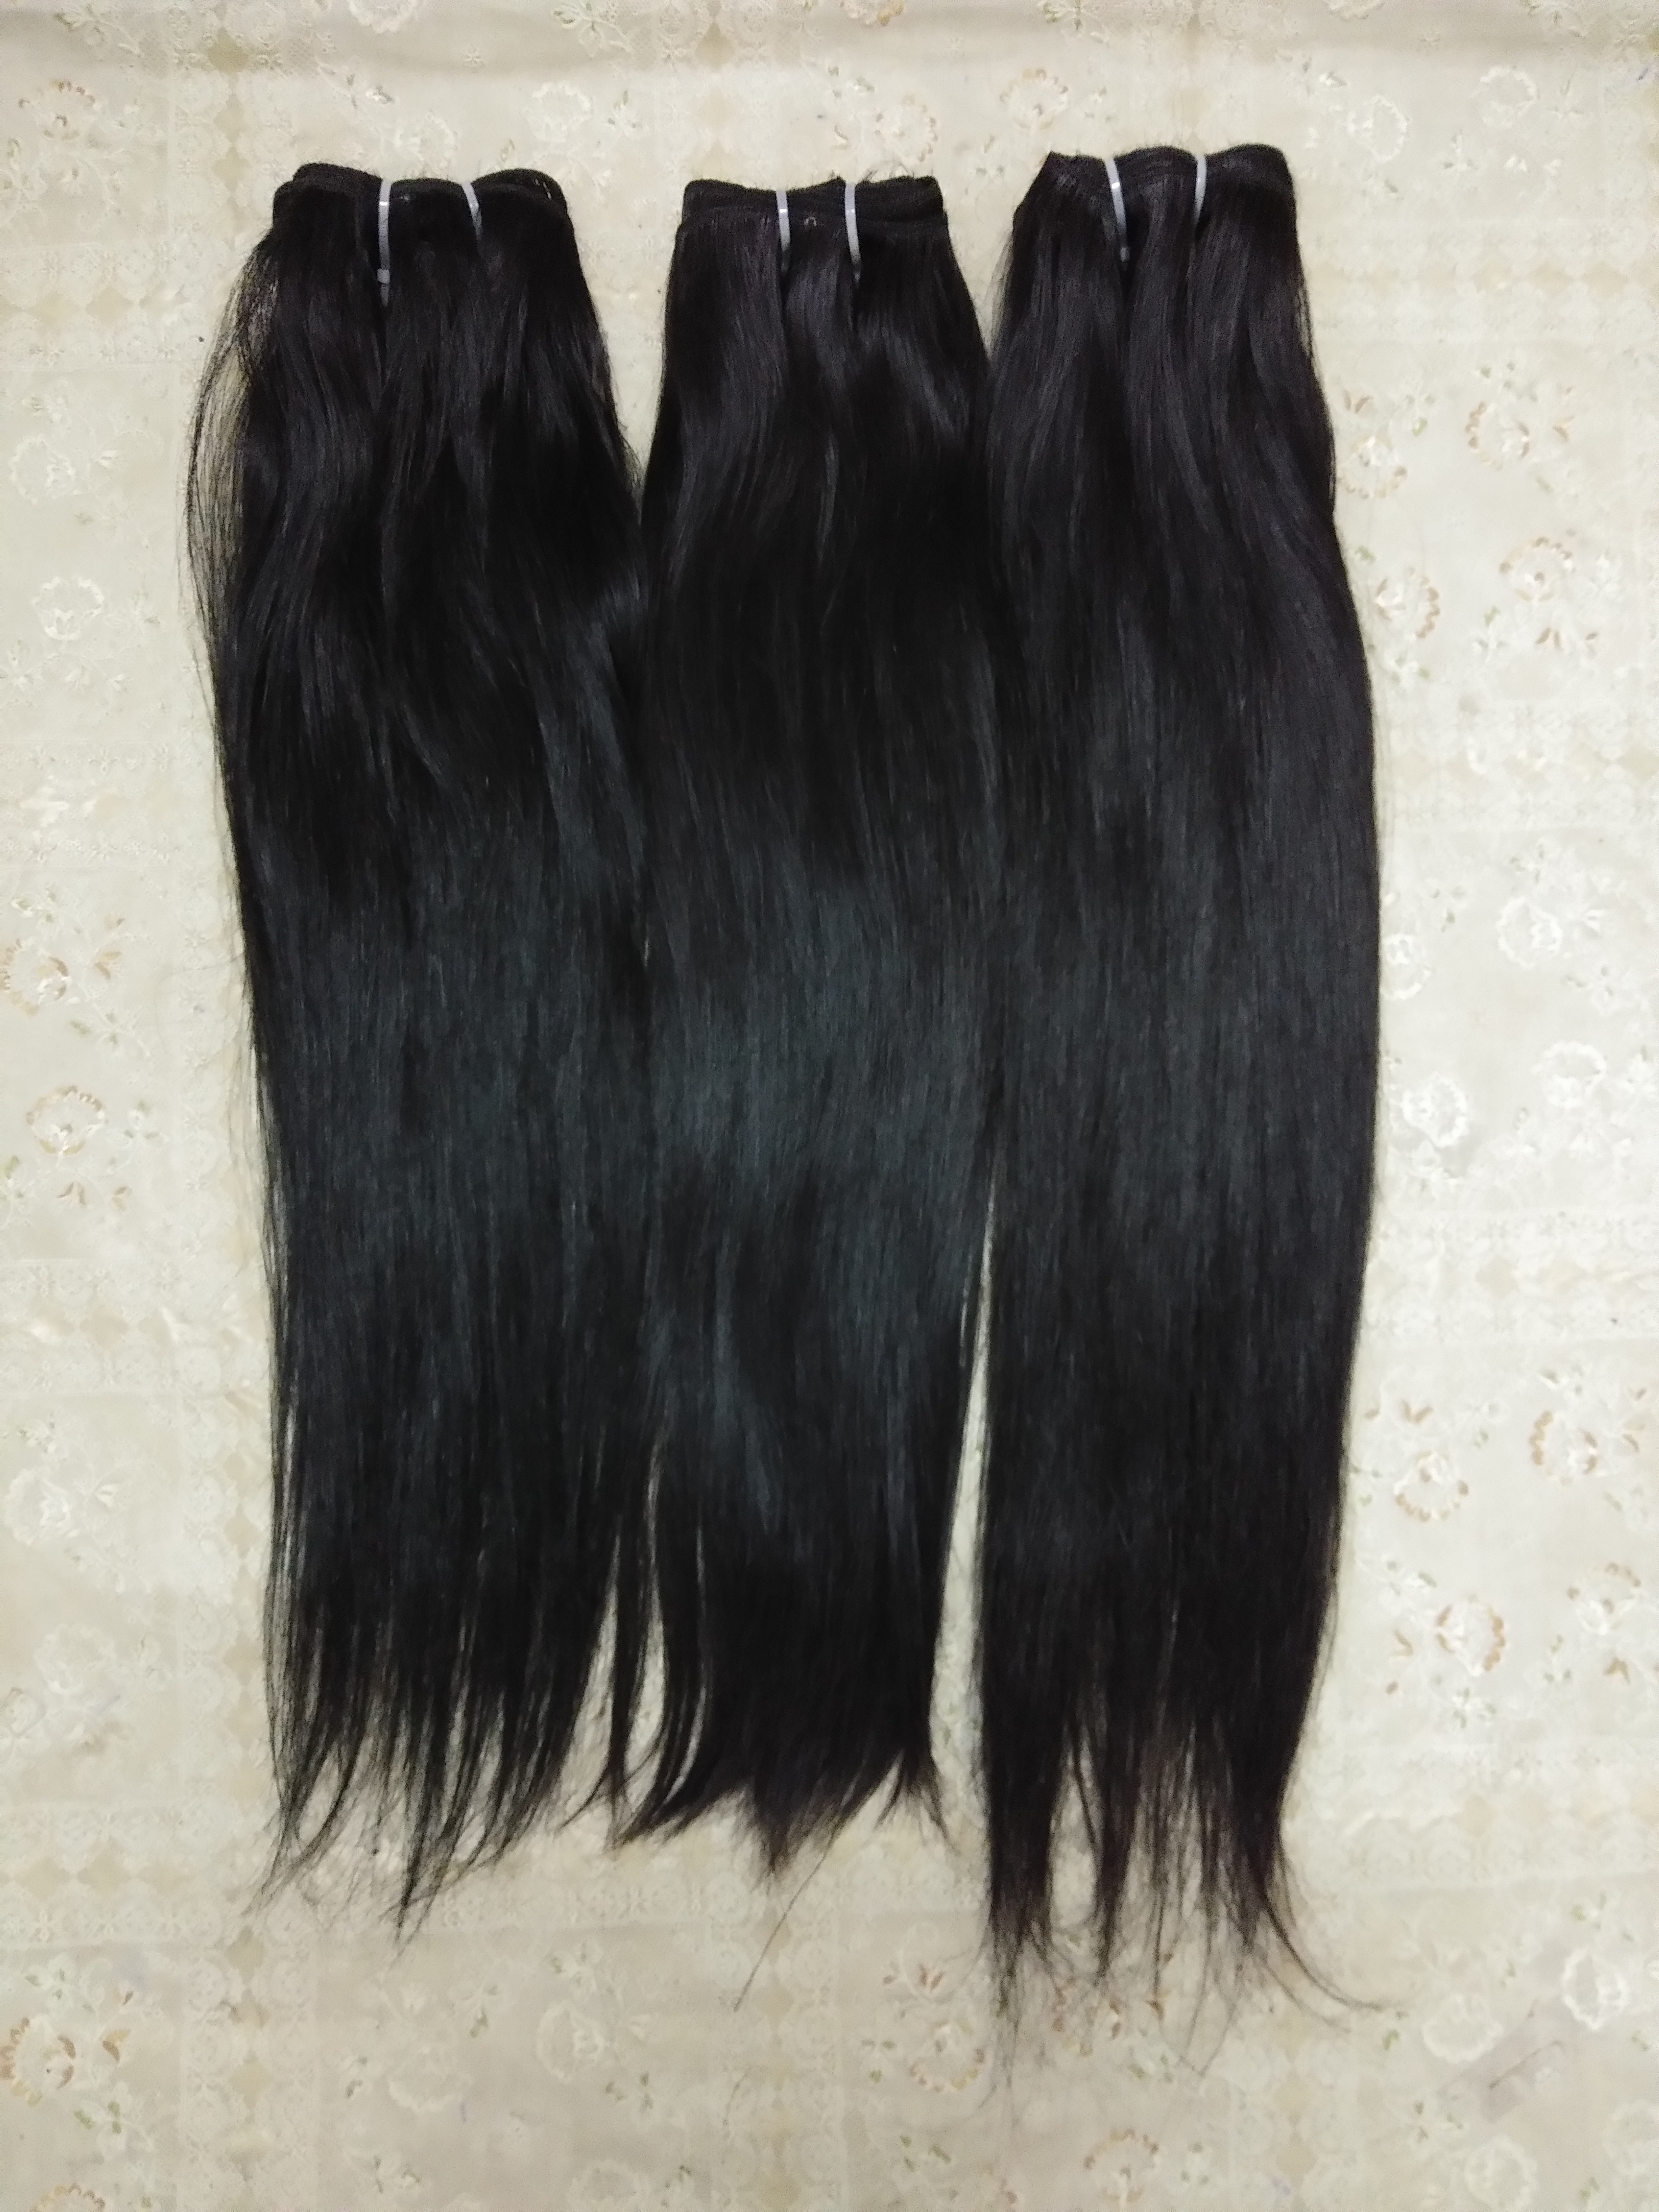 Virgin Indian Remy Straight best hair extensions